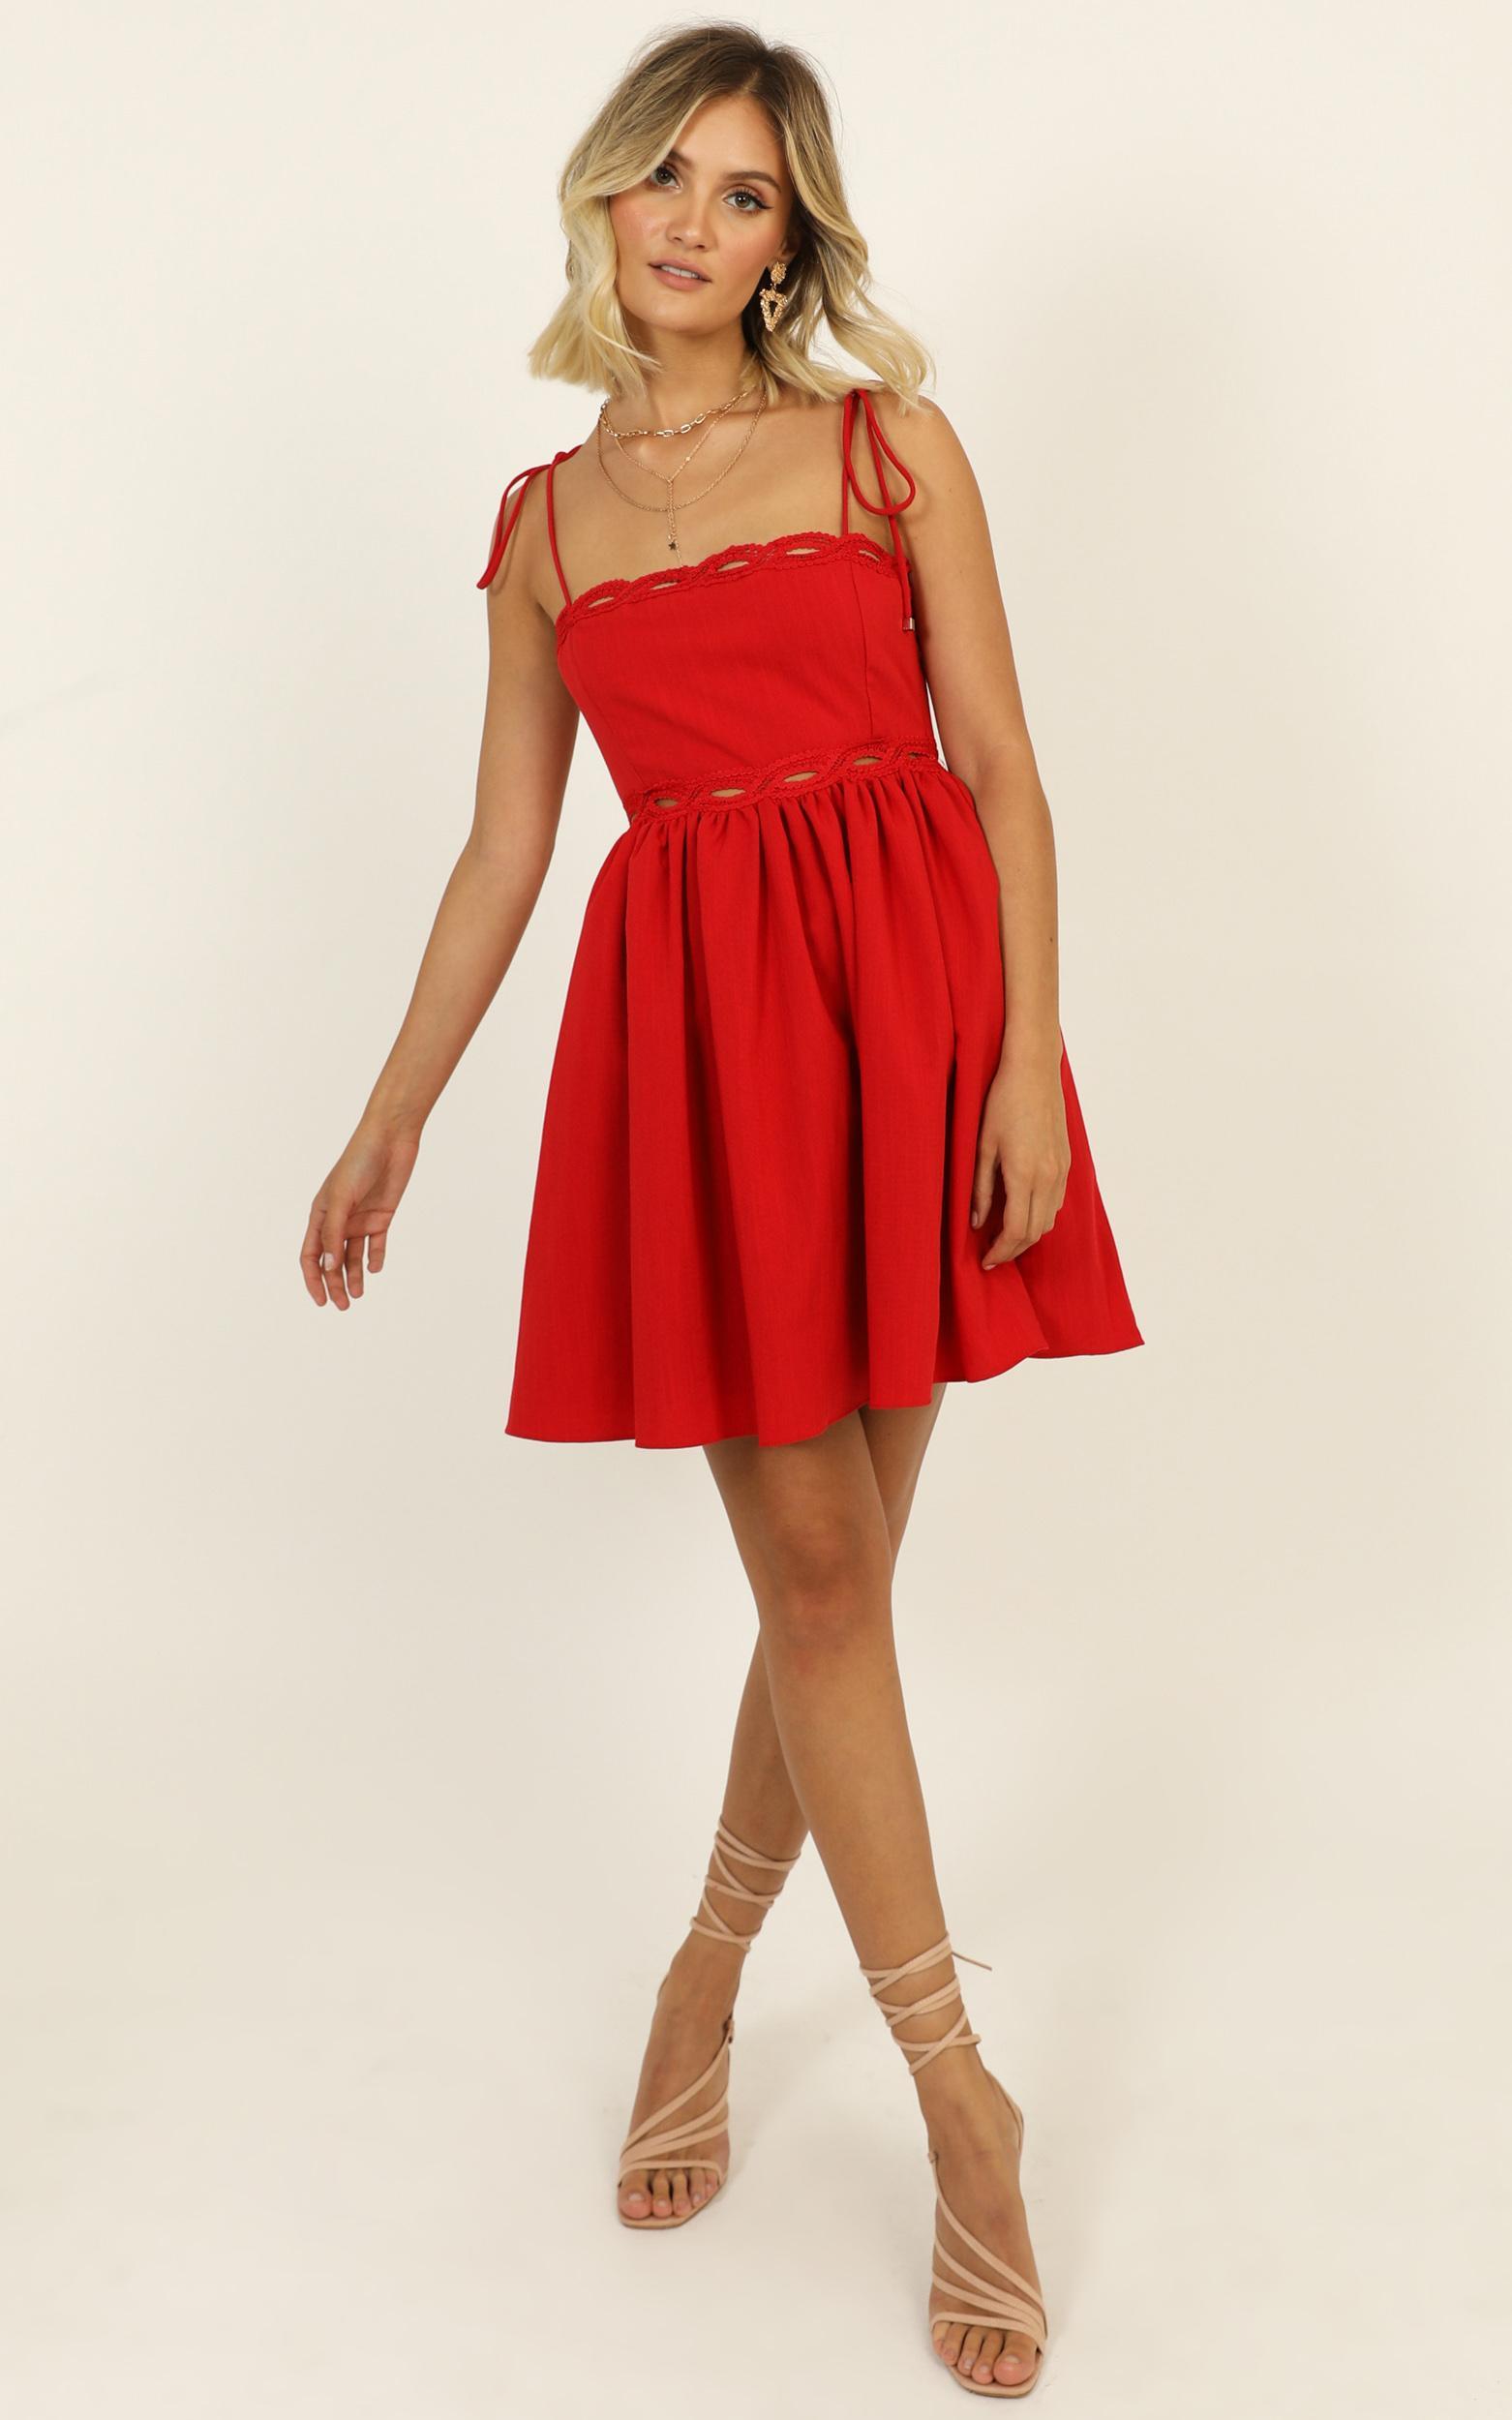 Get Out Right Now Dress in red linen look - 20 (XXXXL), Red, hi-res image number null